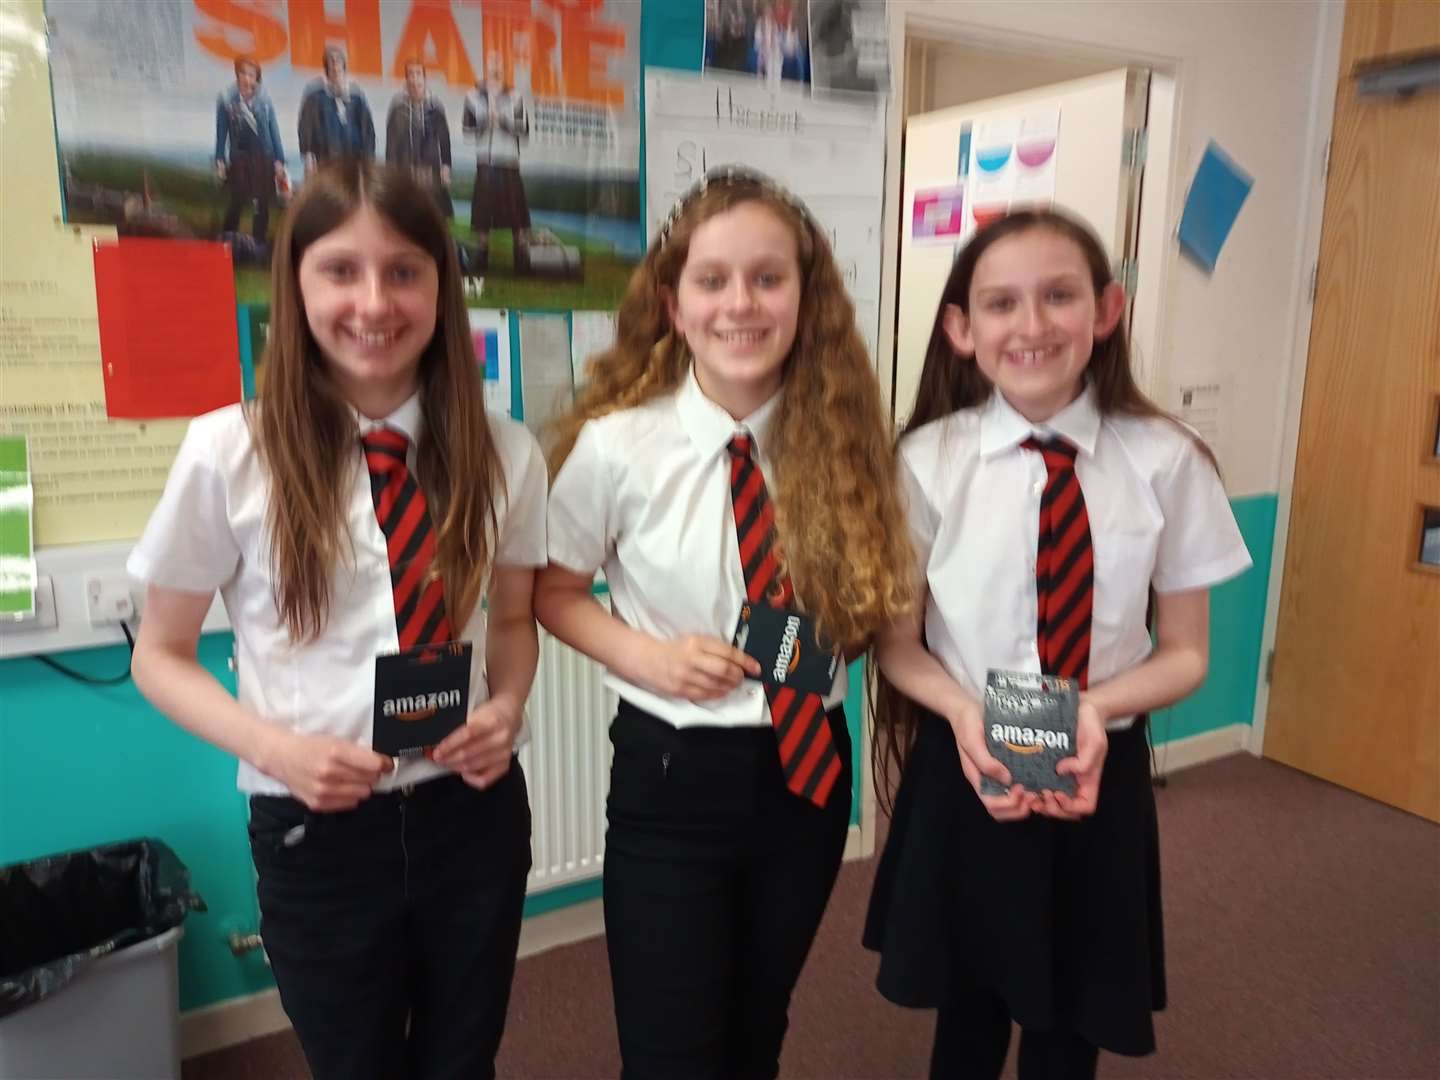 From left: Antonia, Georgia and Emily from S1 with their Amazon voucher prizes.